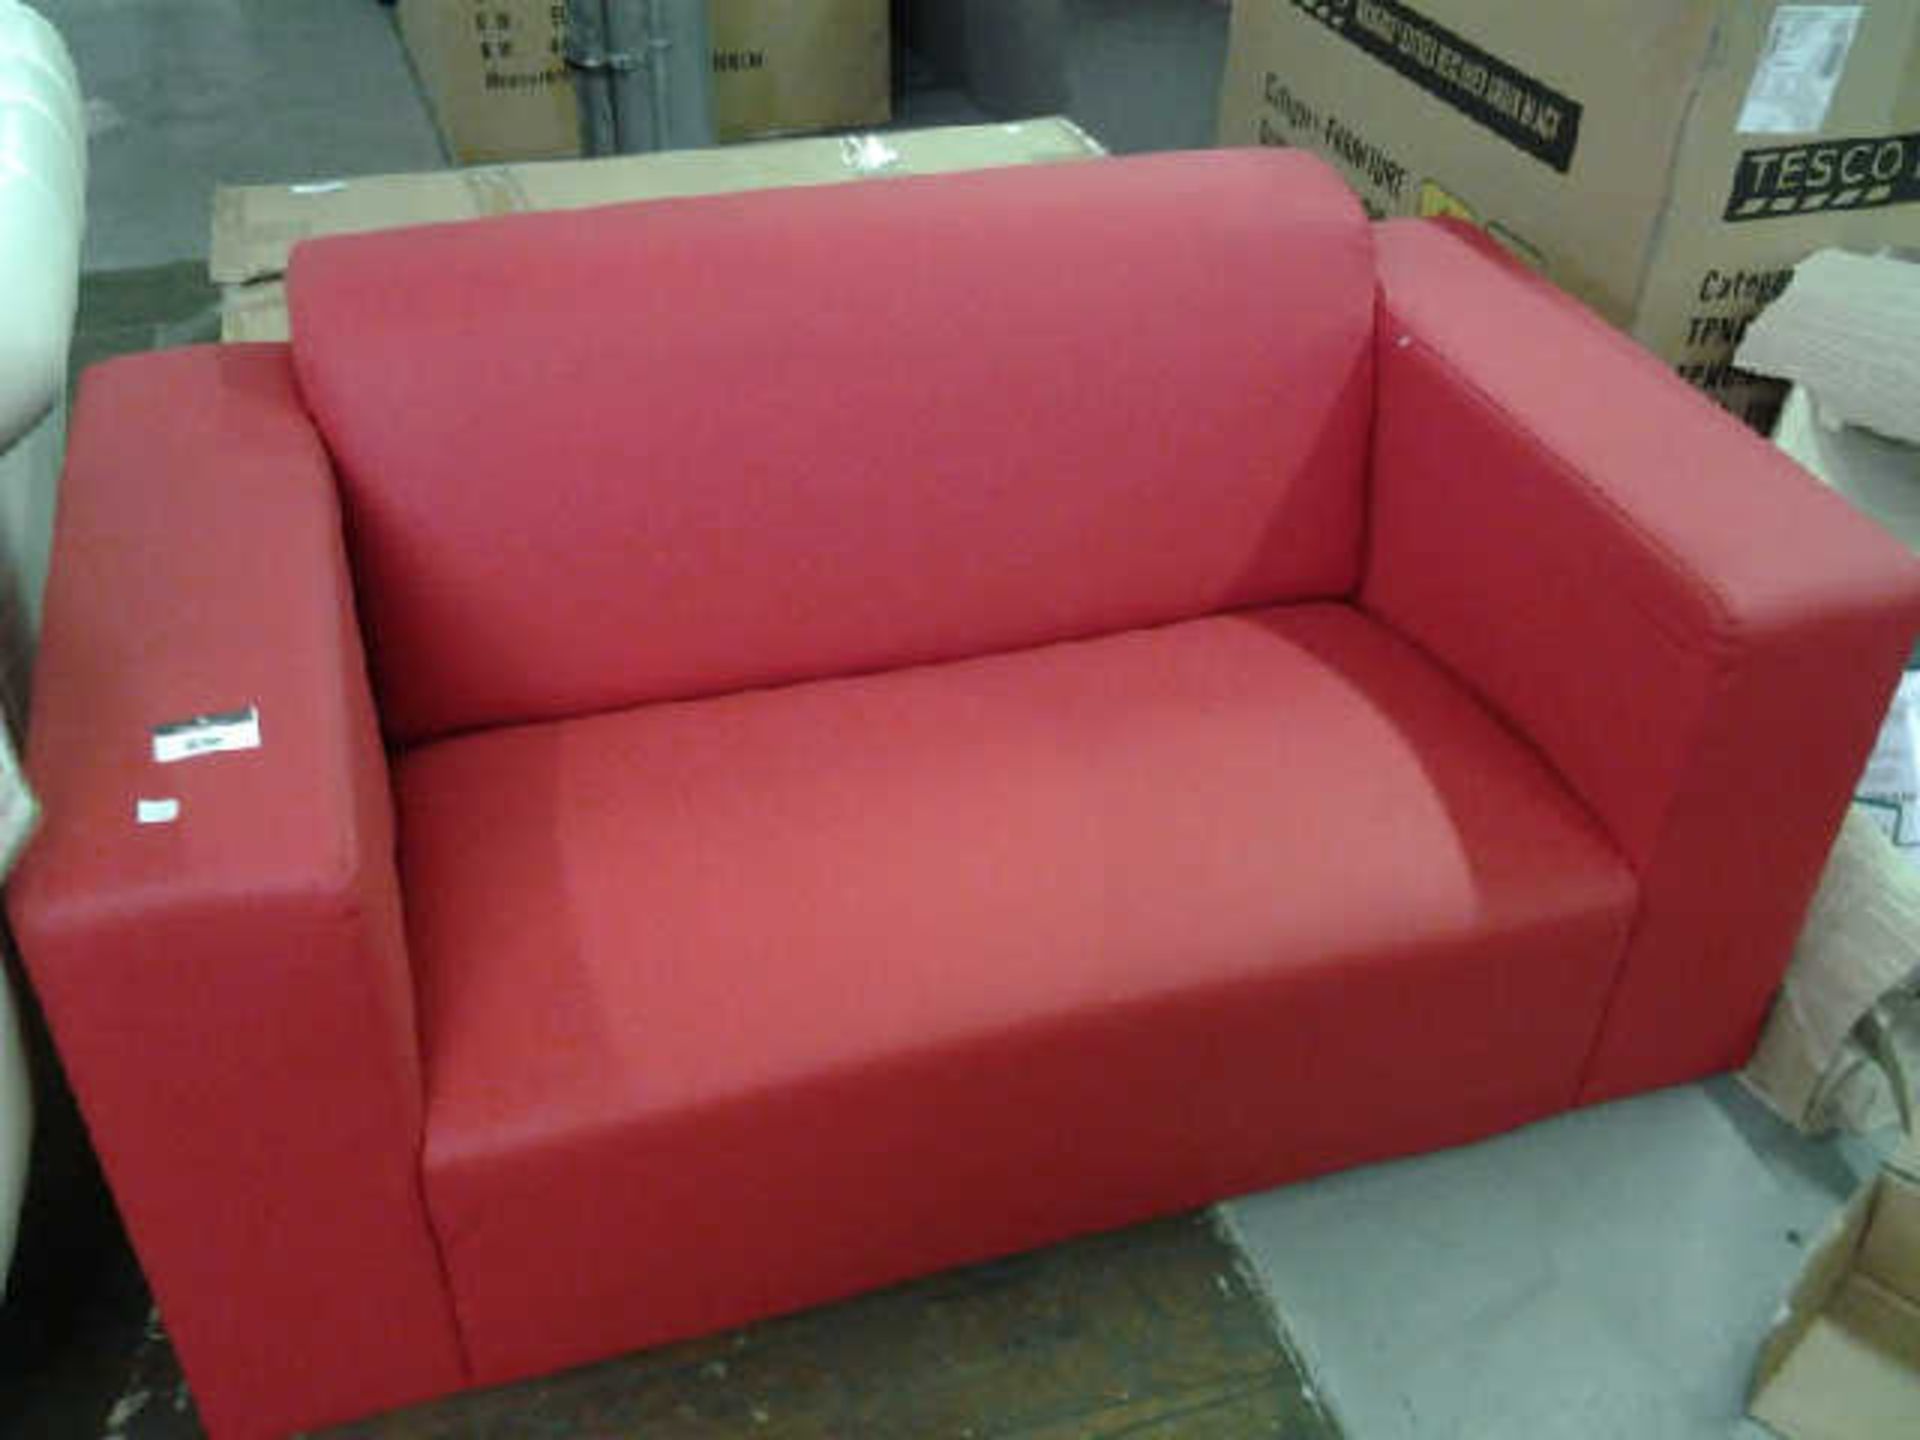 STANZA RED FAUX LEATHER 2 SEATER SOFA - Image 2 of 2